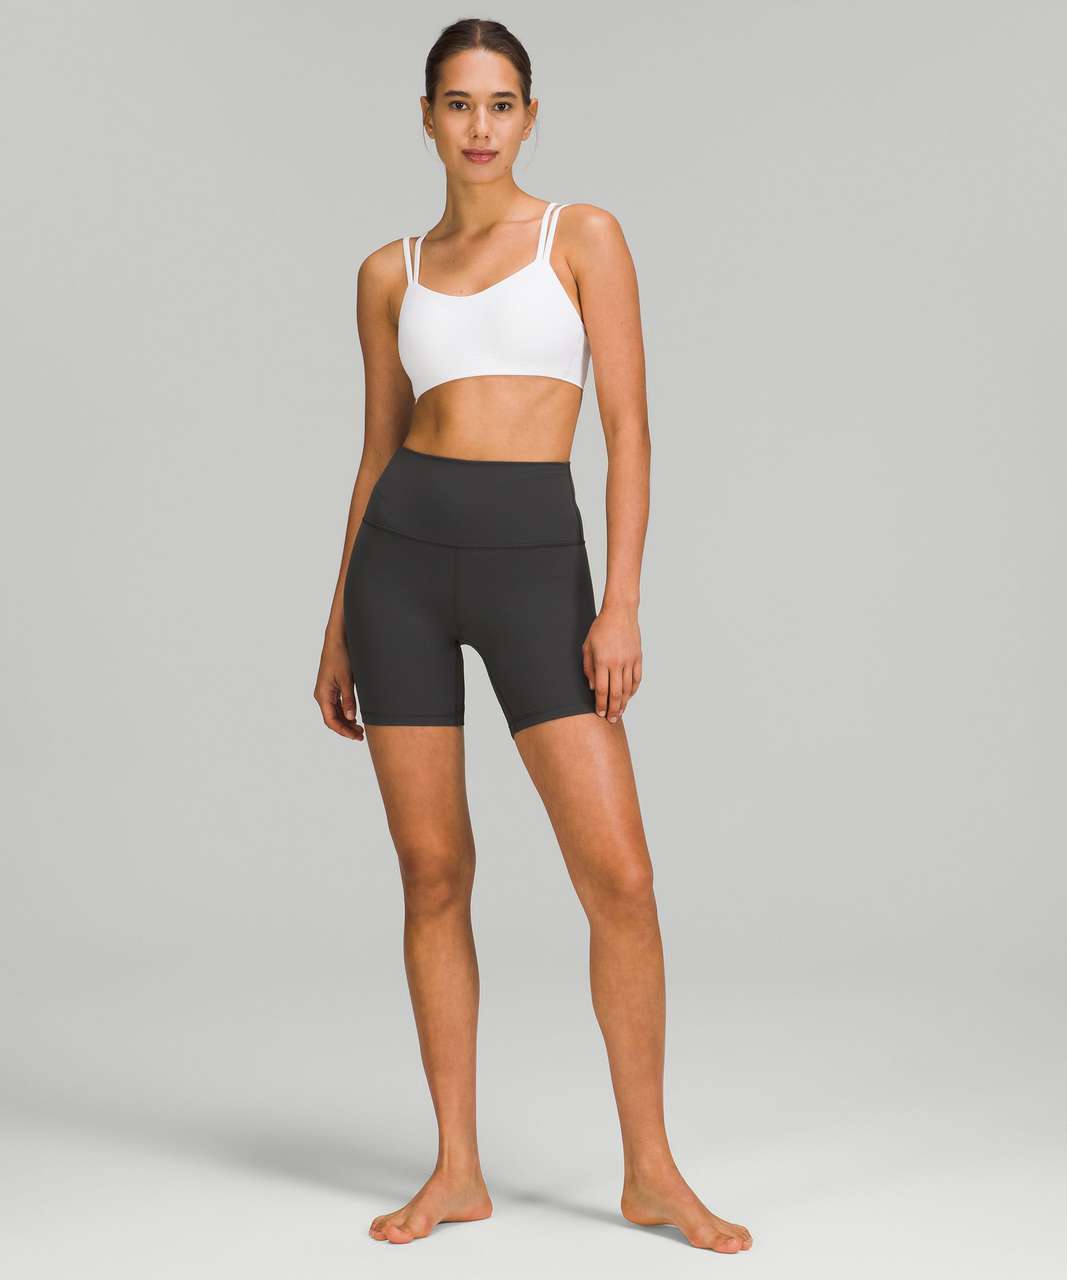 Lululemon Like a Cloud Ribbed Bra *Light Support, B/C Cup - White